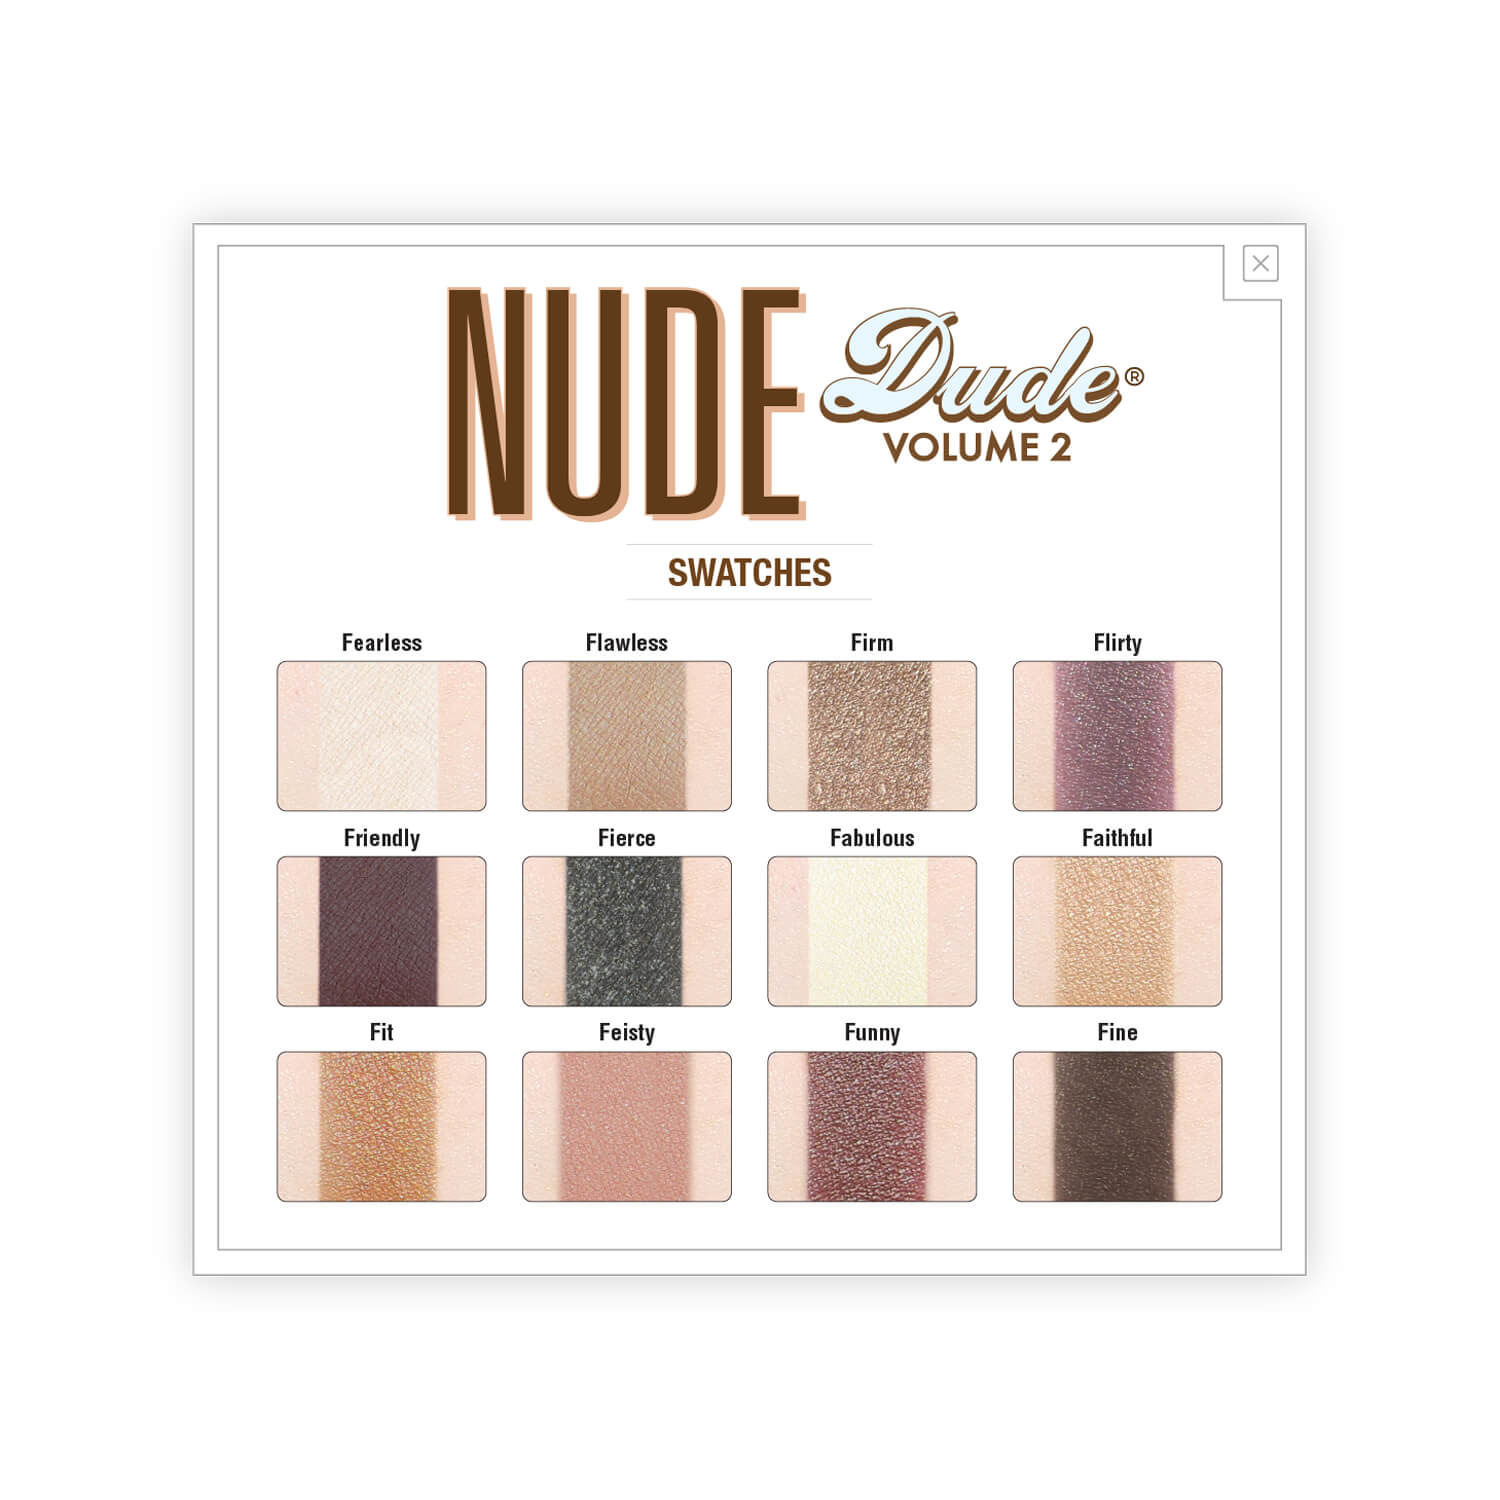 theBalm Nude Dude Nude Eyeshadow Palette Swatches